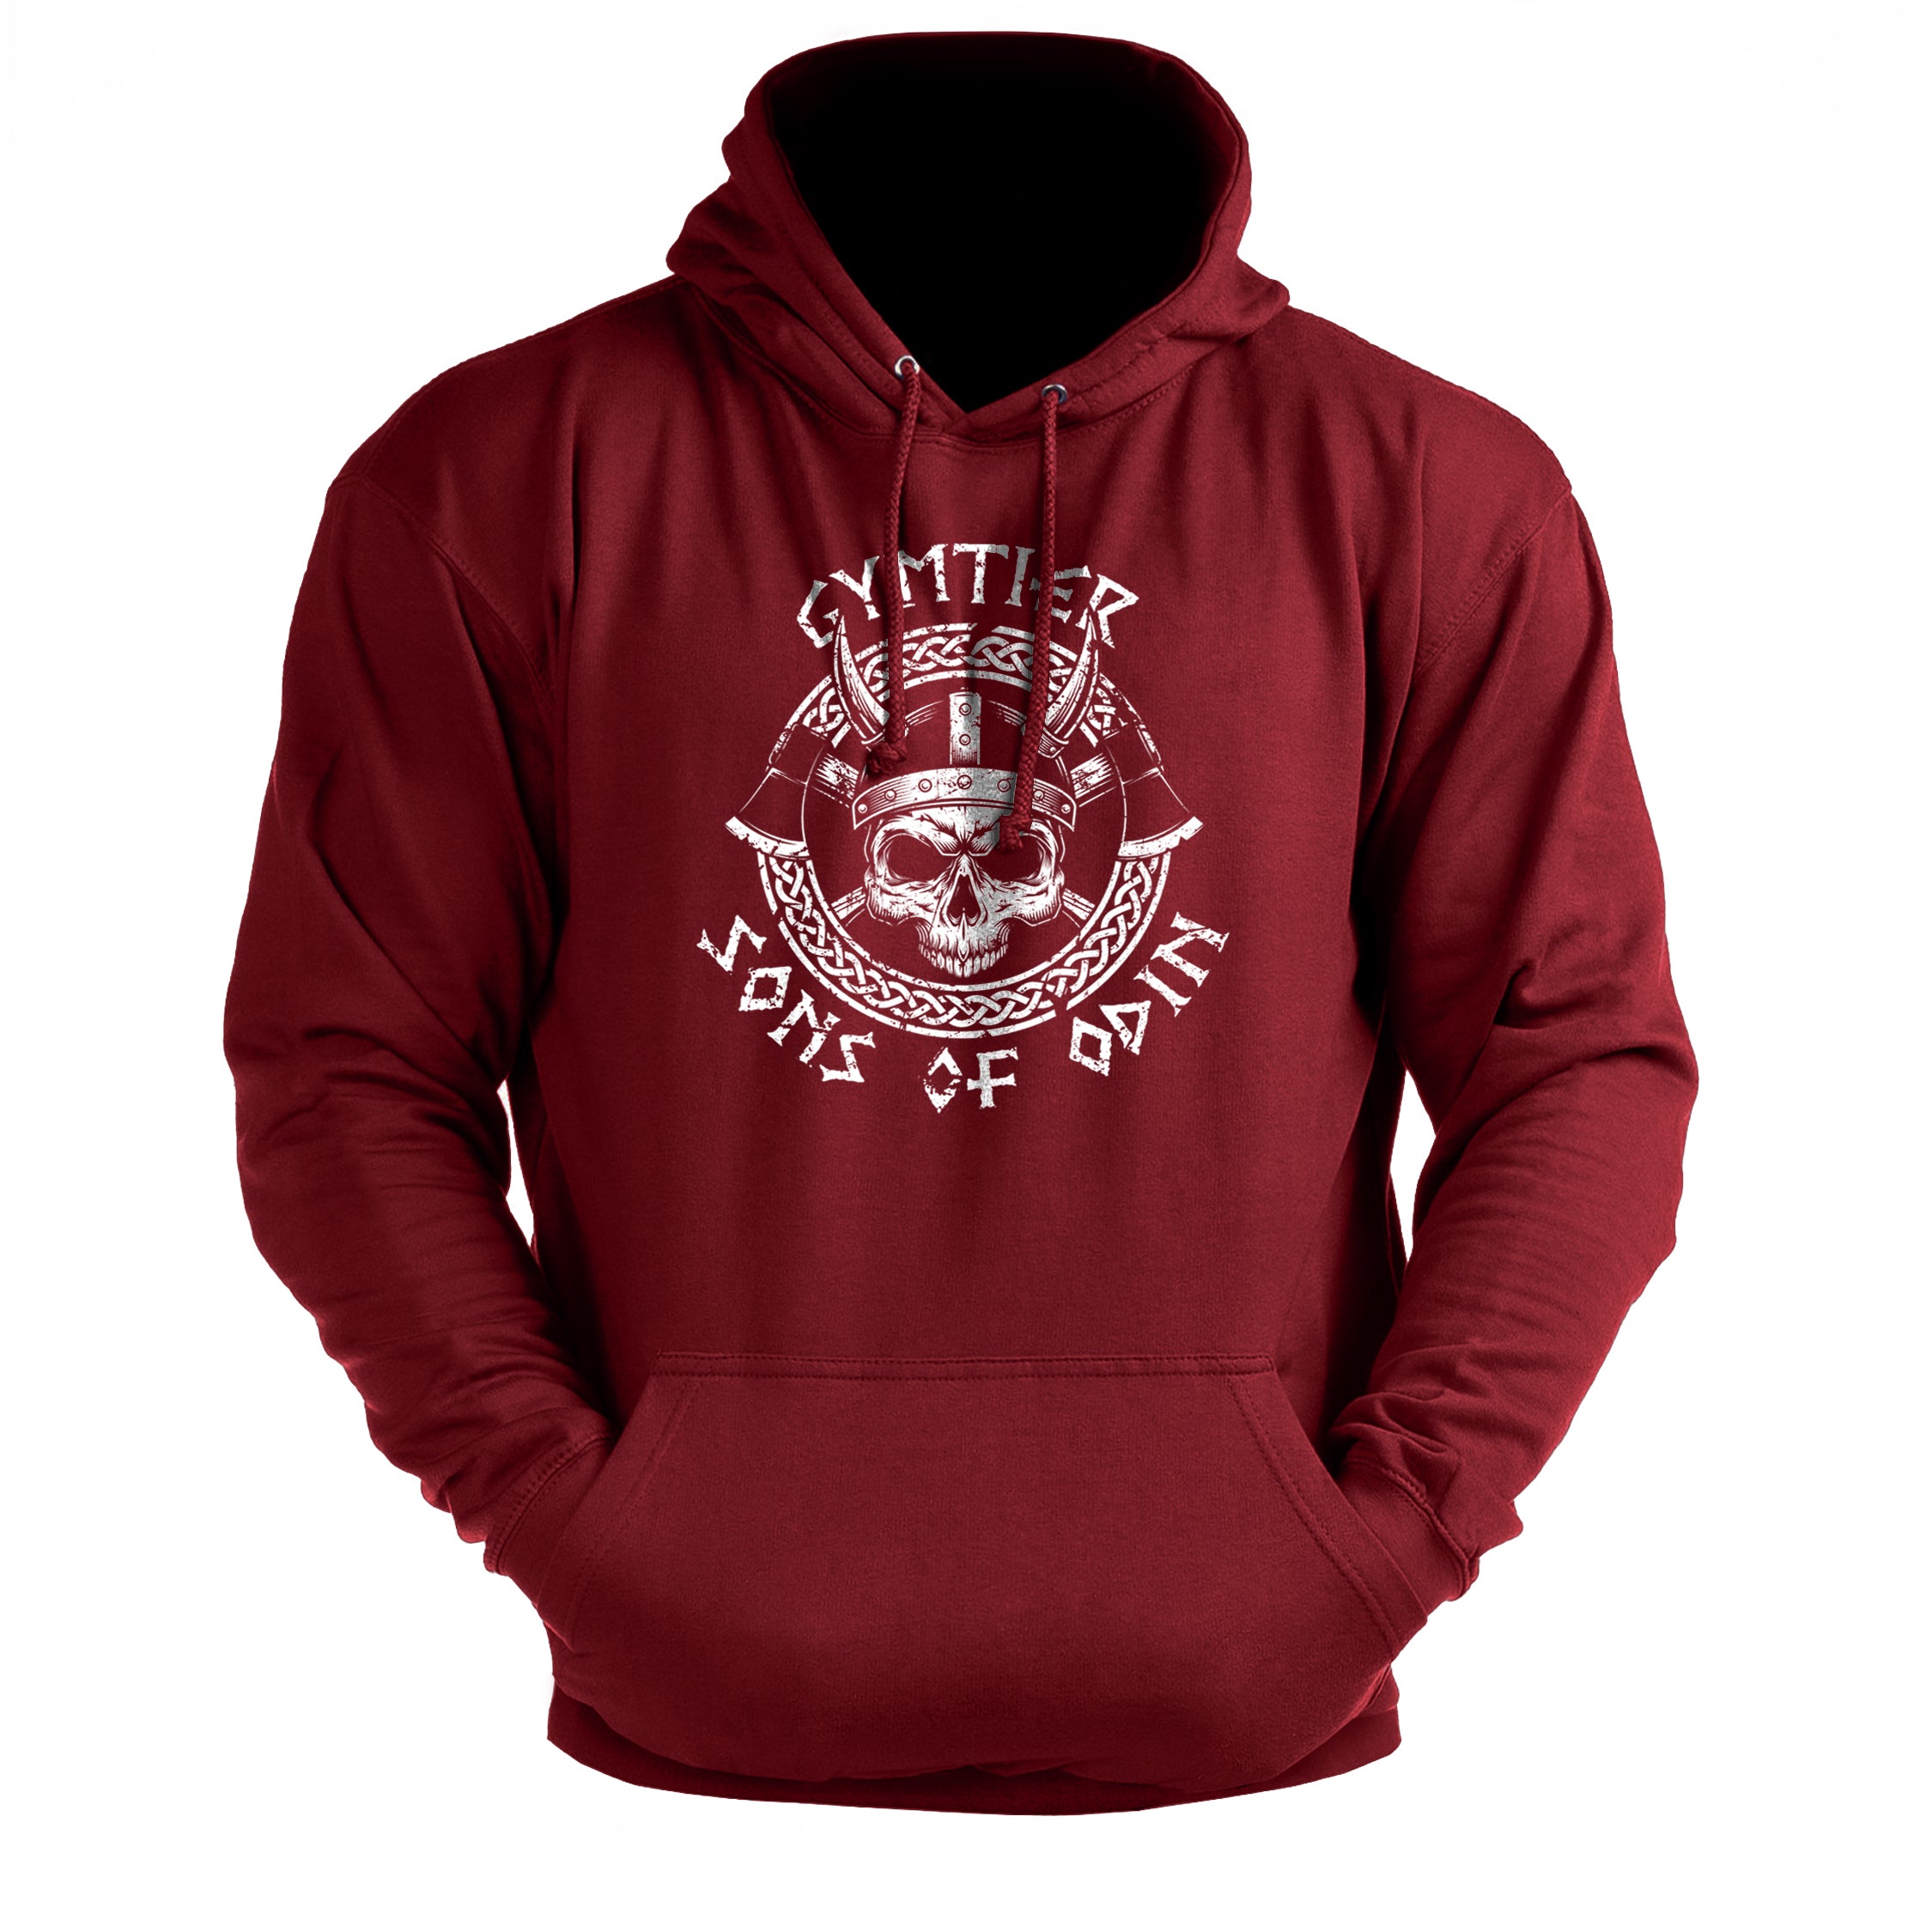 Sons Of Odin Chest - Gym Hoodie